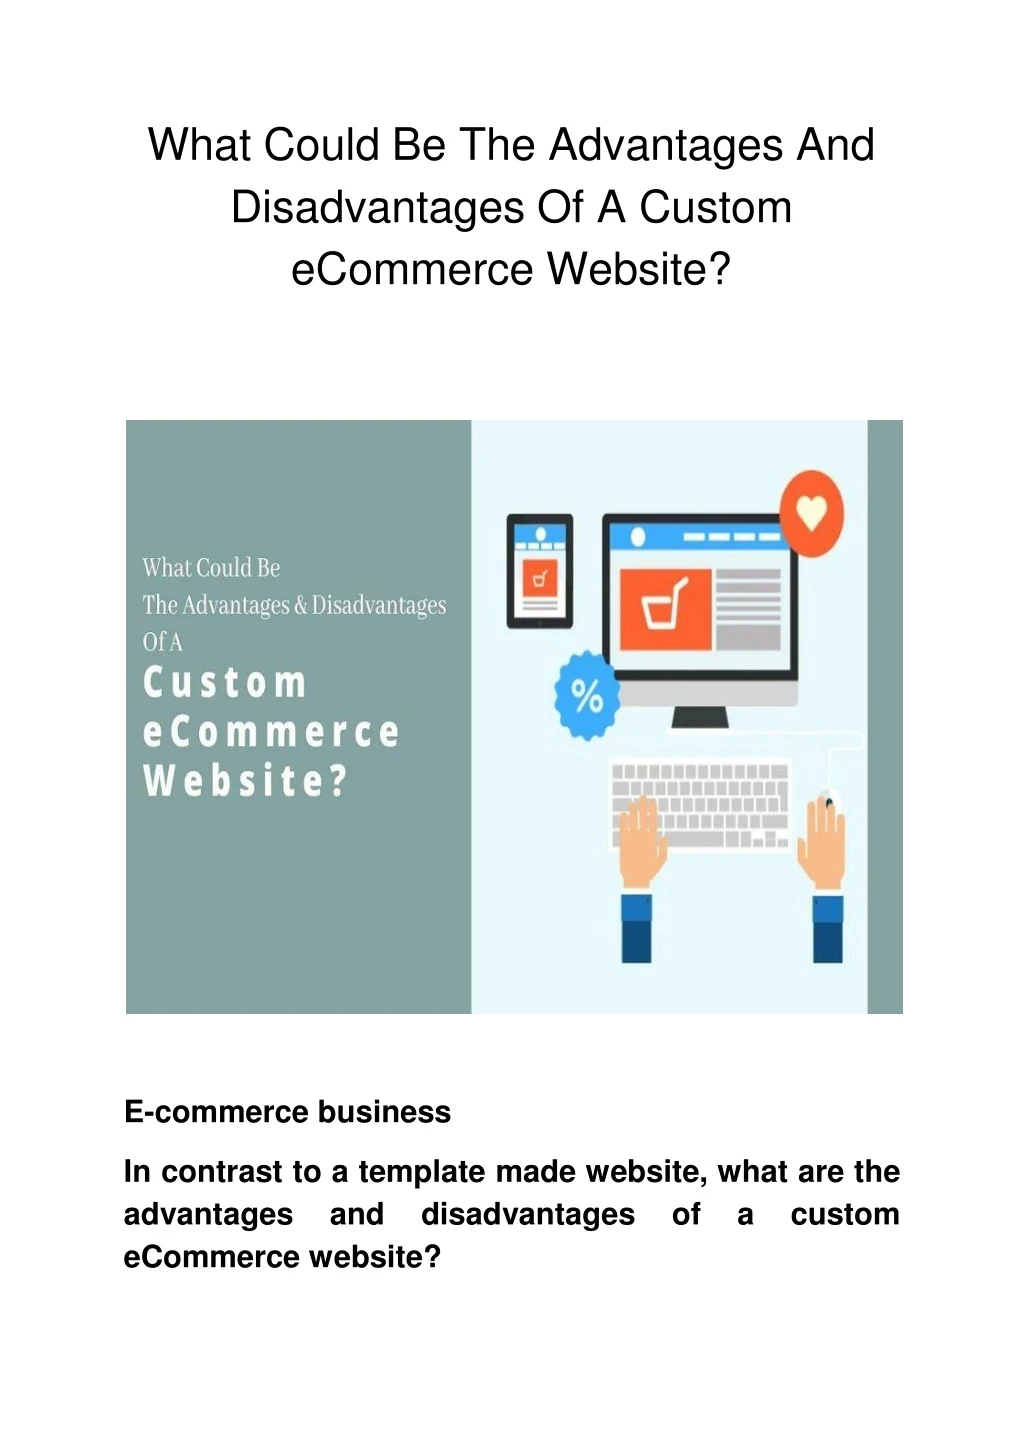 what could be the advantages and disadvantages of a custom ecommerce website